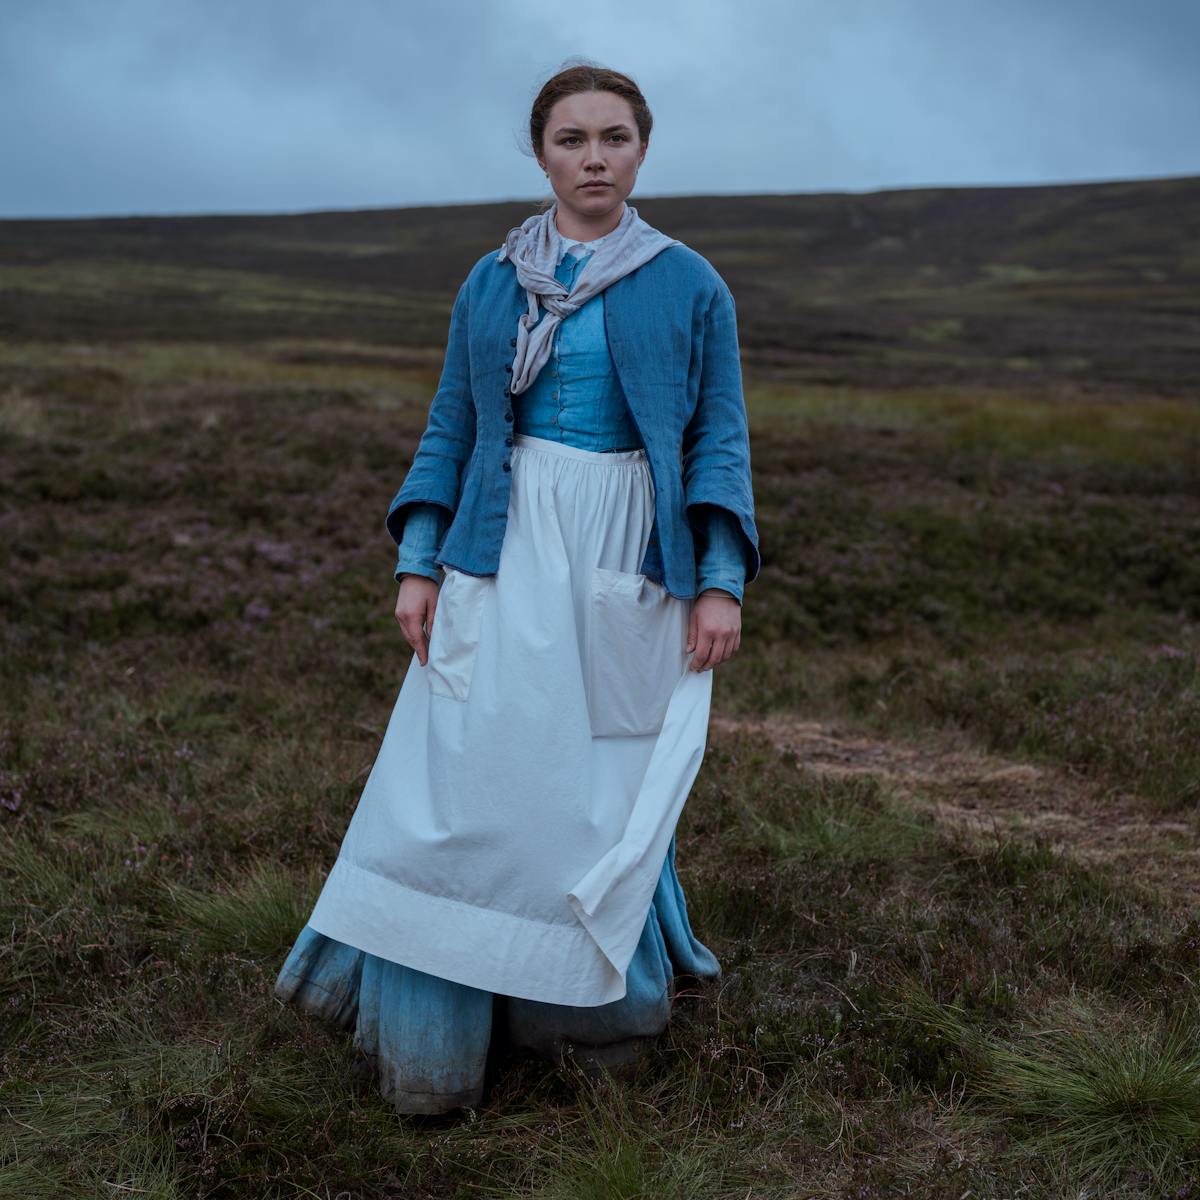 Nurse Lib (Florence Pugh) wears a blue dress and white apron and stands in a grassy field.